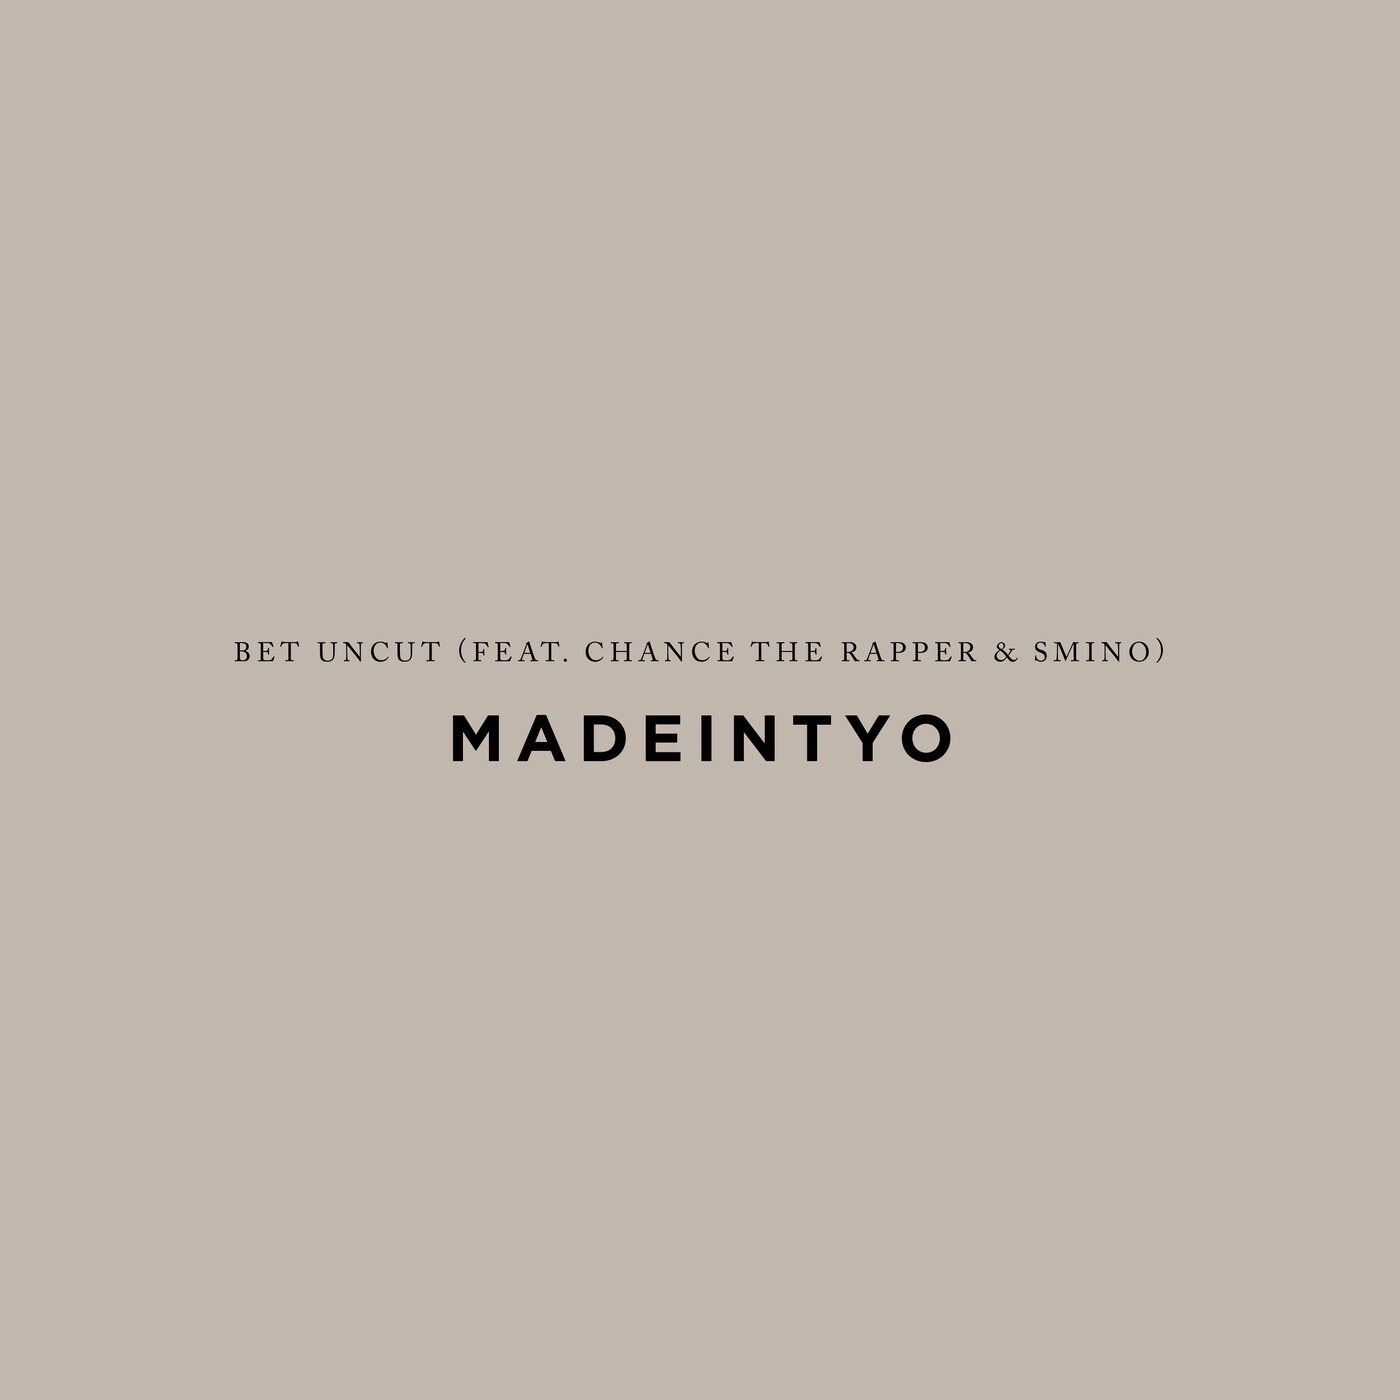 MadeinTYO - BET Uncut (feat. Chance the Rapper & Smino) - Single